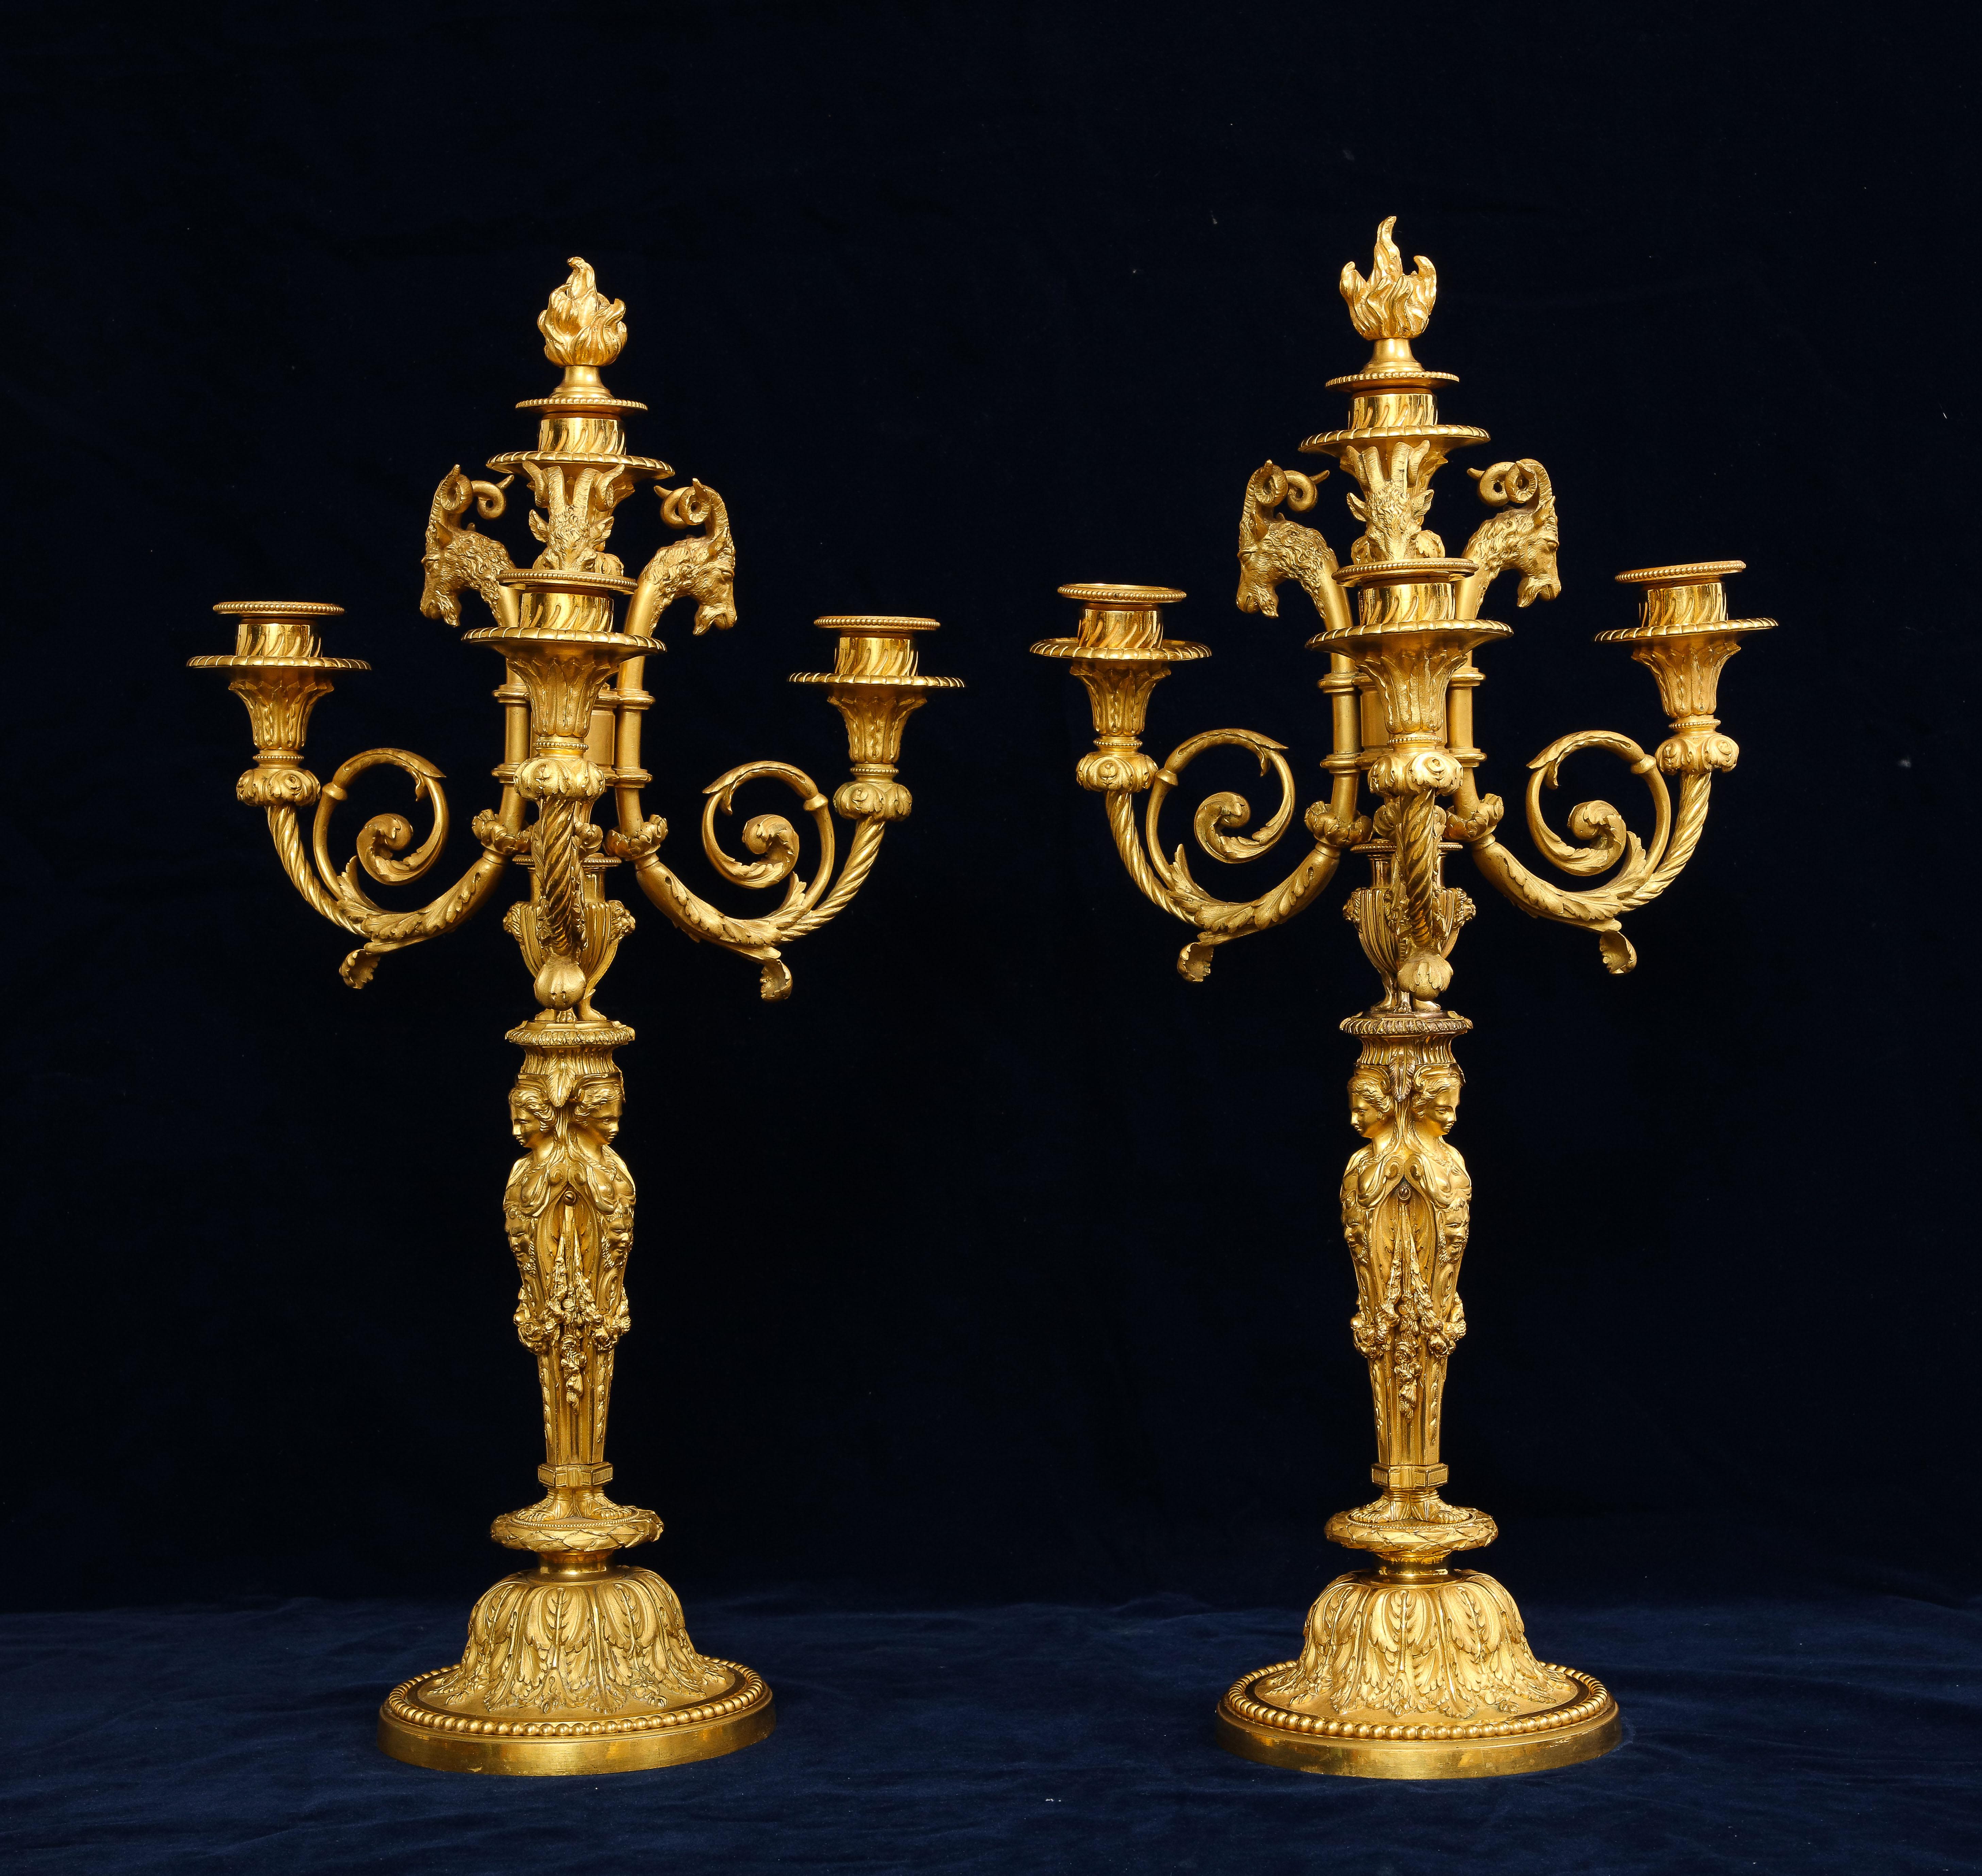 Louis XVI Pair of French 19th C. Ormolu Figural 4 Light Candelabras, After P. Gouthiere For Sale